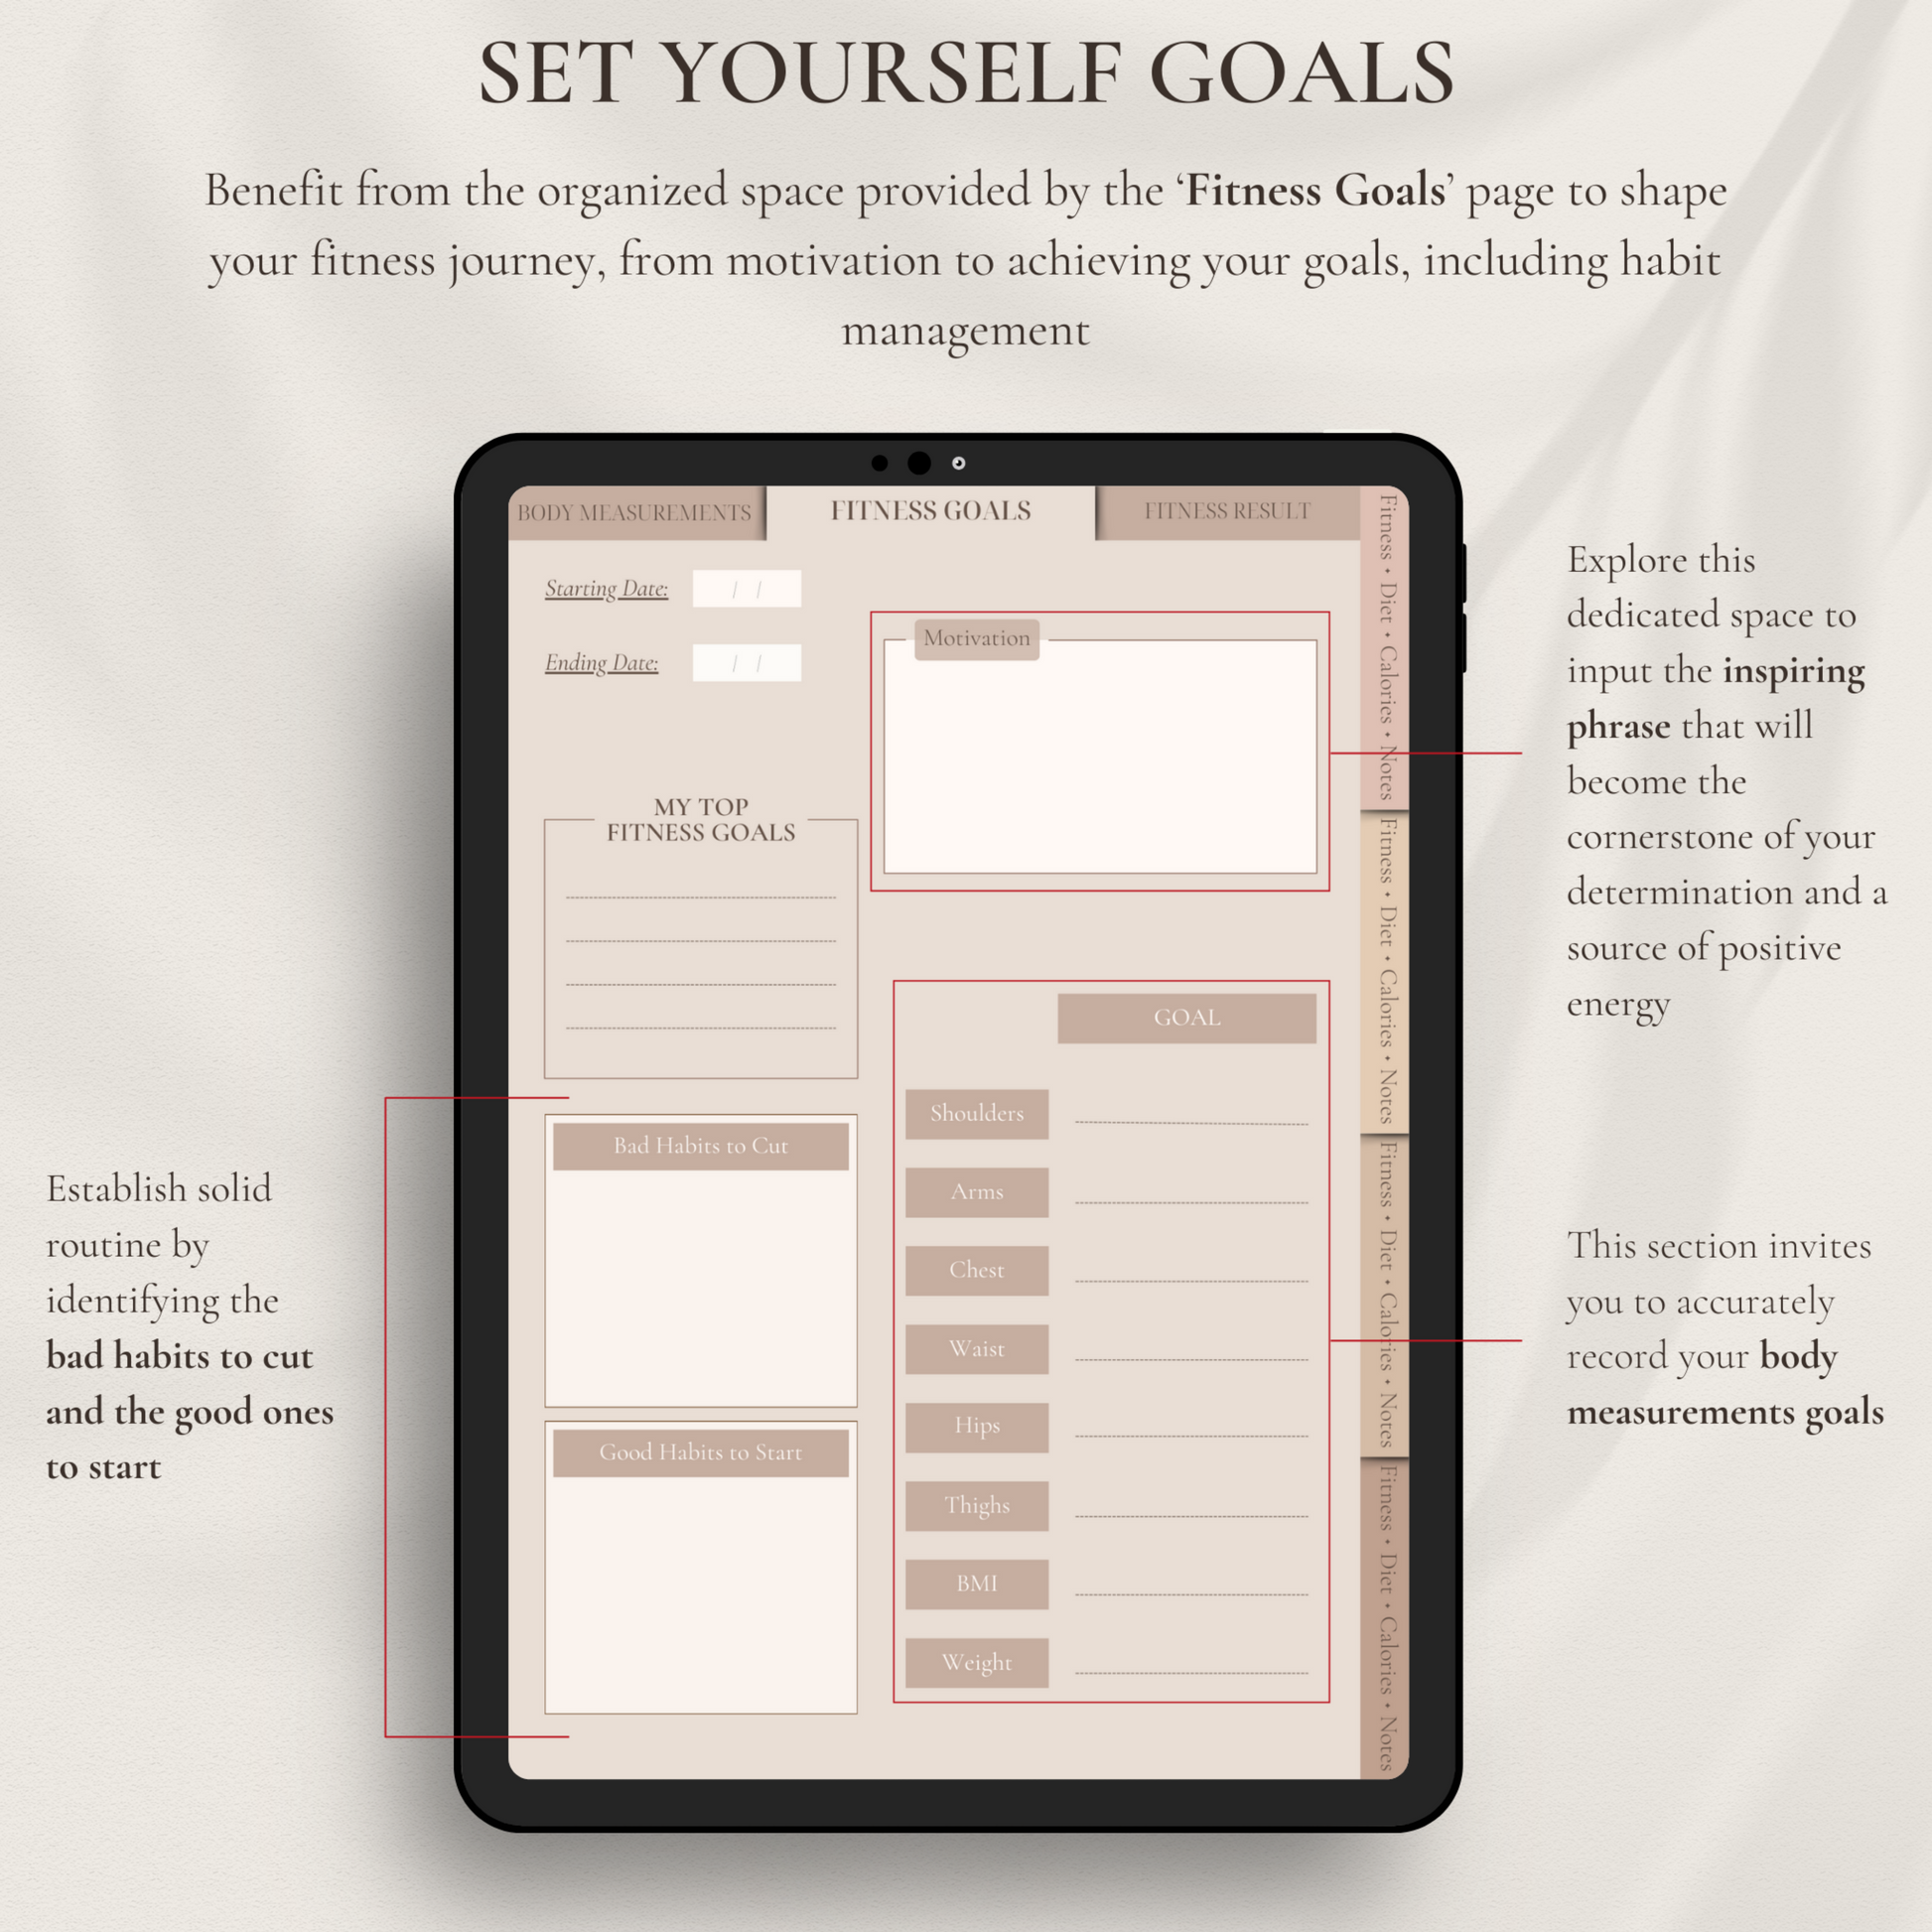 Benefit from the organized space provided by the 'Fitness Goals' page to shape your fitness journey, from motivation to achieving your goals, including habit management